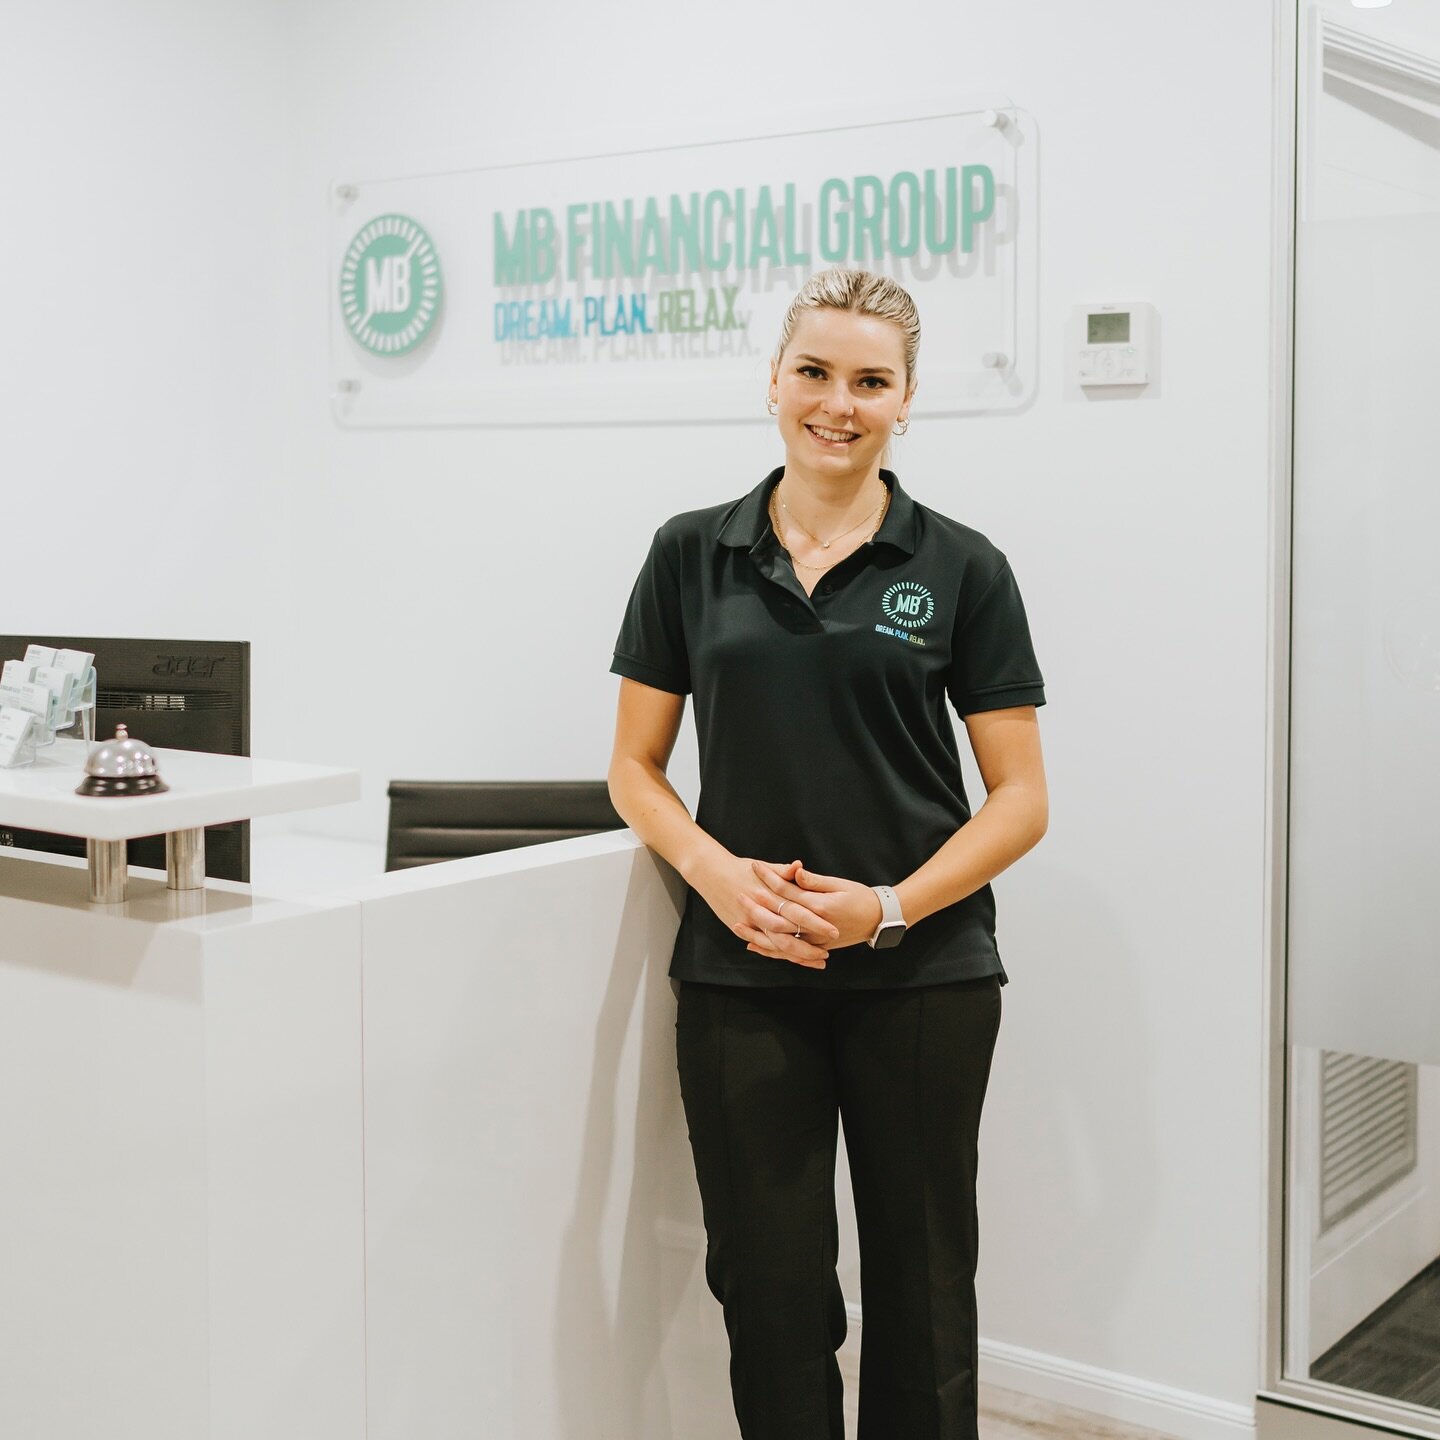 We have a new team member! Welcome Ellie to our MBFG Team!
You will see Ellie&rsquo;s bright and bubbly smile as you walk into our office. 

Stay tuned for more new staff members&hellip;

Name: Ellie Towns 

Role at MBFG: Receptionist 

A hobby I cou